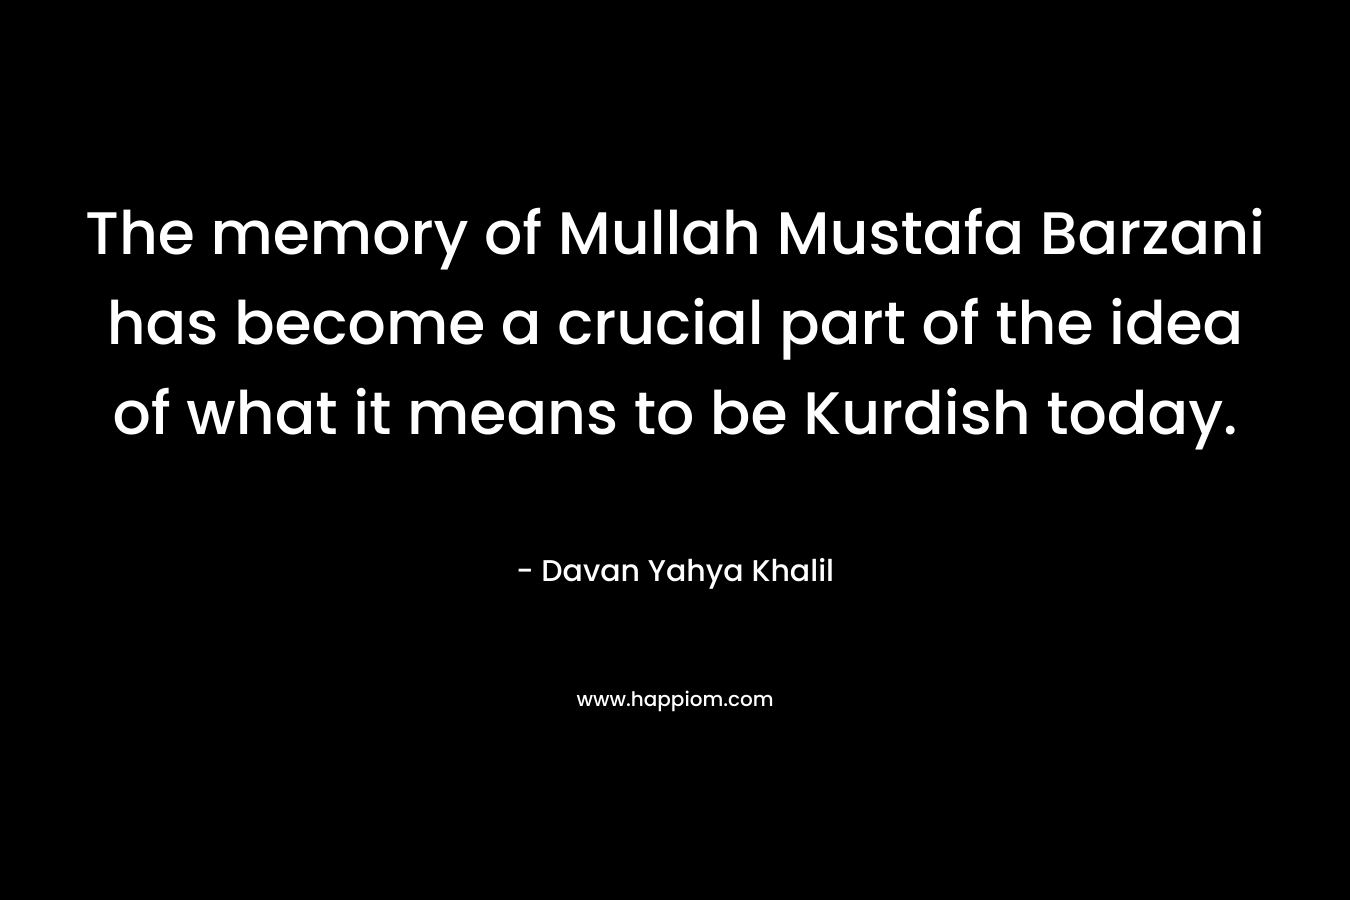 The memory of Mullah Mustafa Barzani has become a crucial part of the idea of what it means to be Kurdish today. – Davan Yahya Khalil